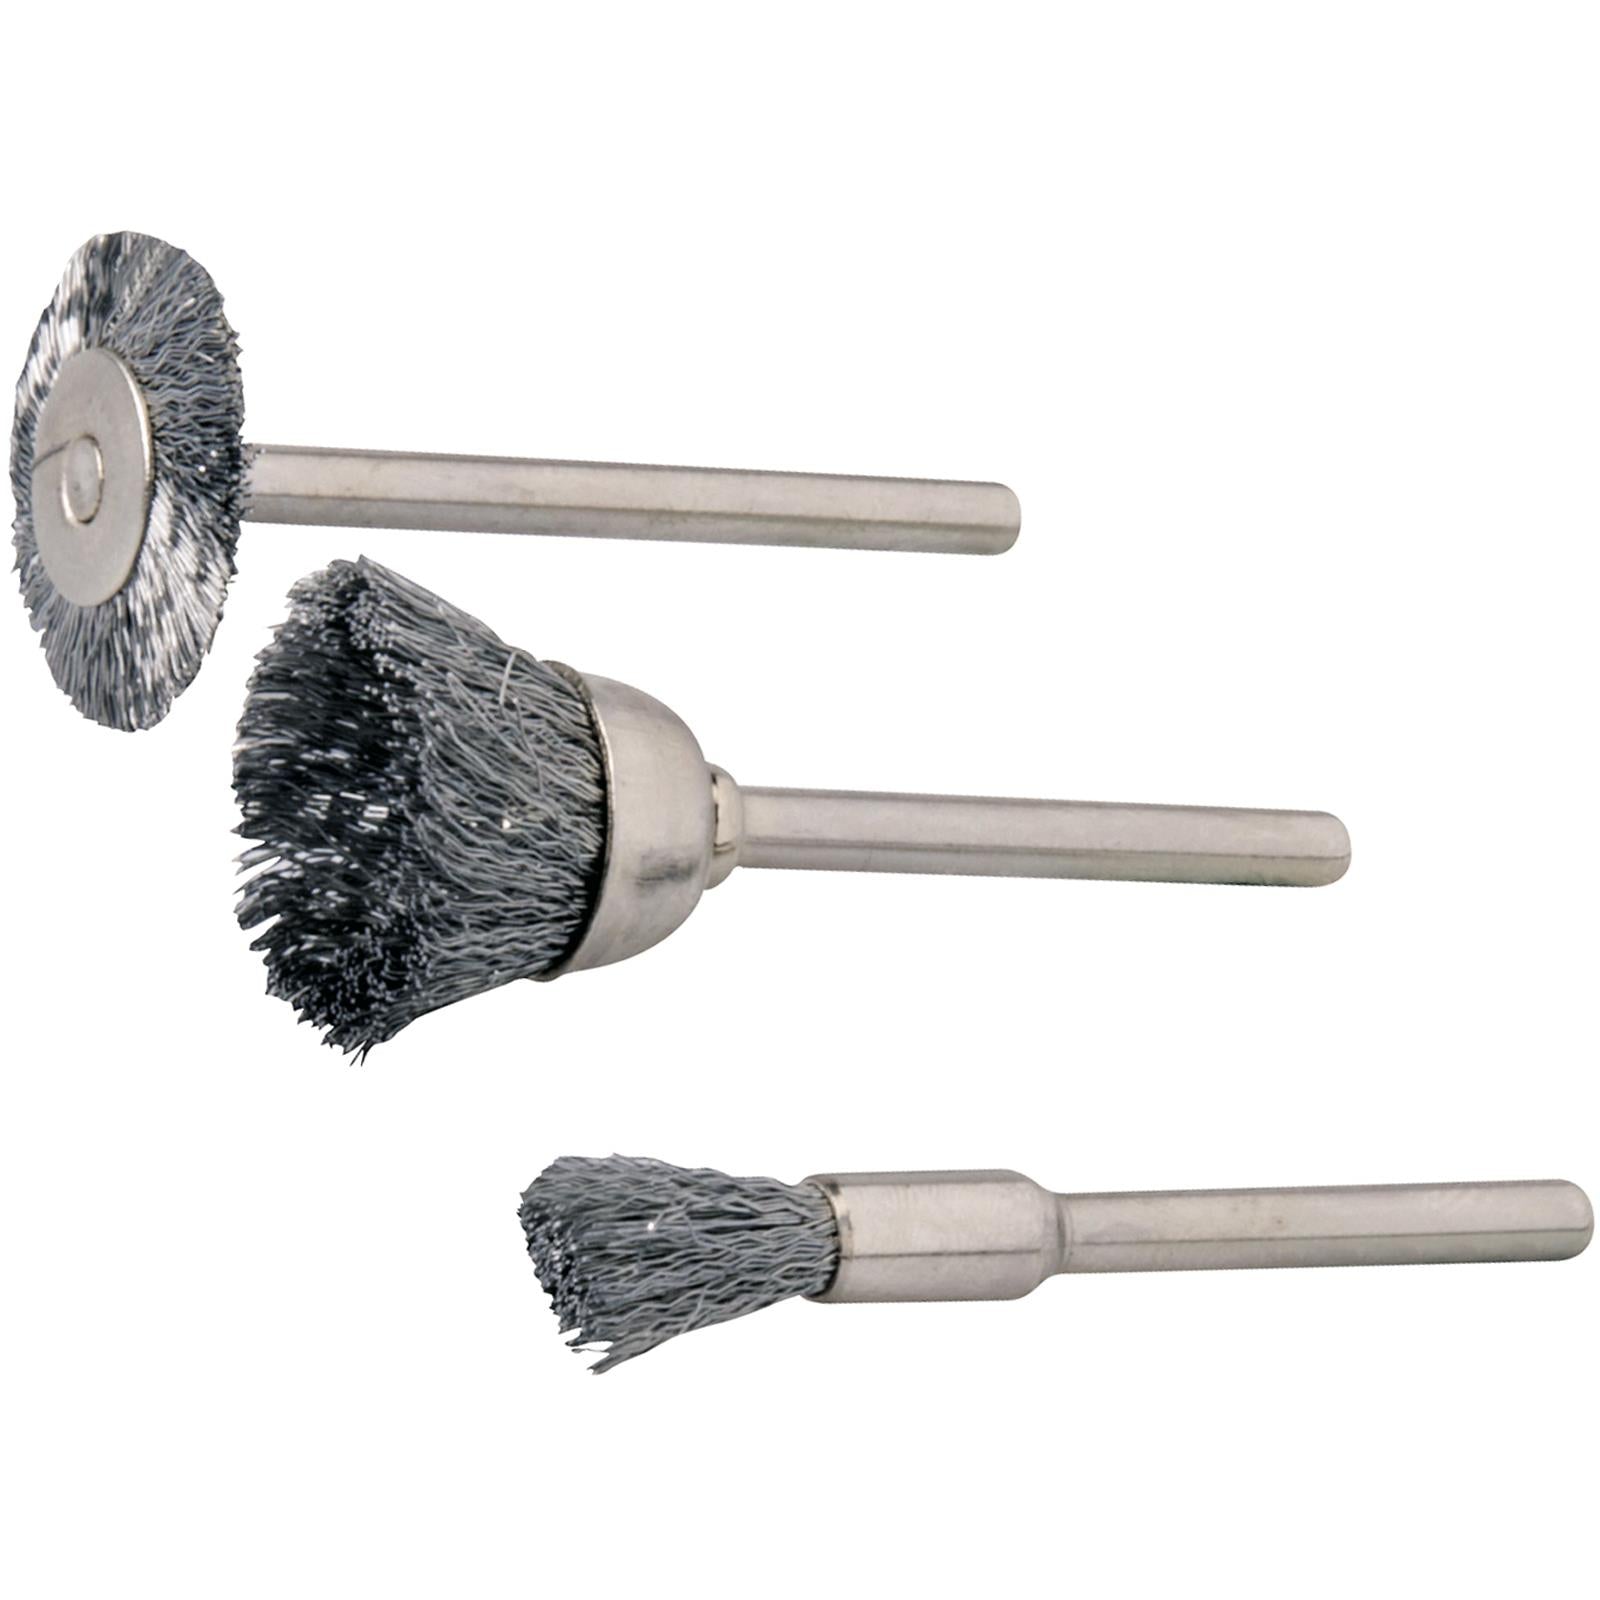 Silverline 3 Piece Steel Brush Set 5, 15 & 19mm Rotary Cleaning Wire